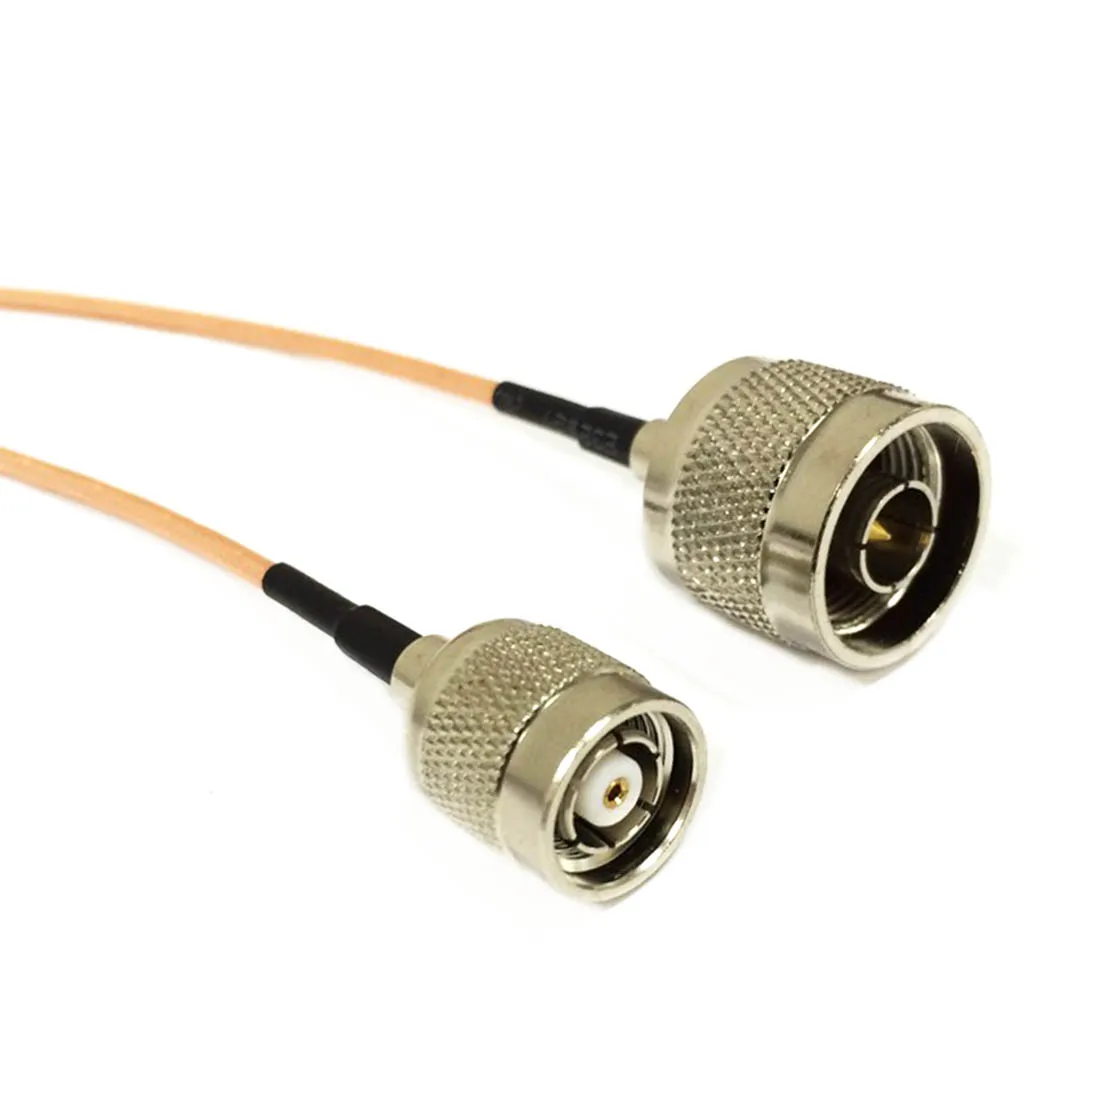 

Modem Coaxial Cable RP-TNC Male Plug Switch N Male Plug Connector RG316 Cable Pigtail 15cm 6" Adapter New